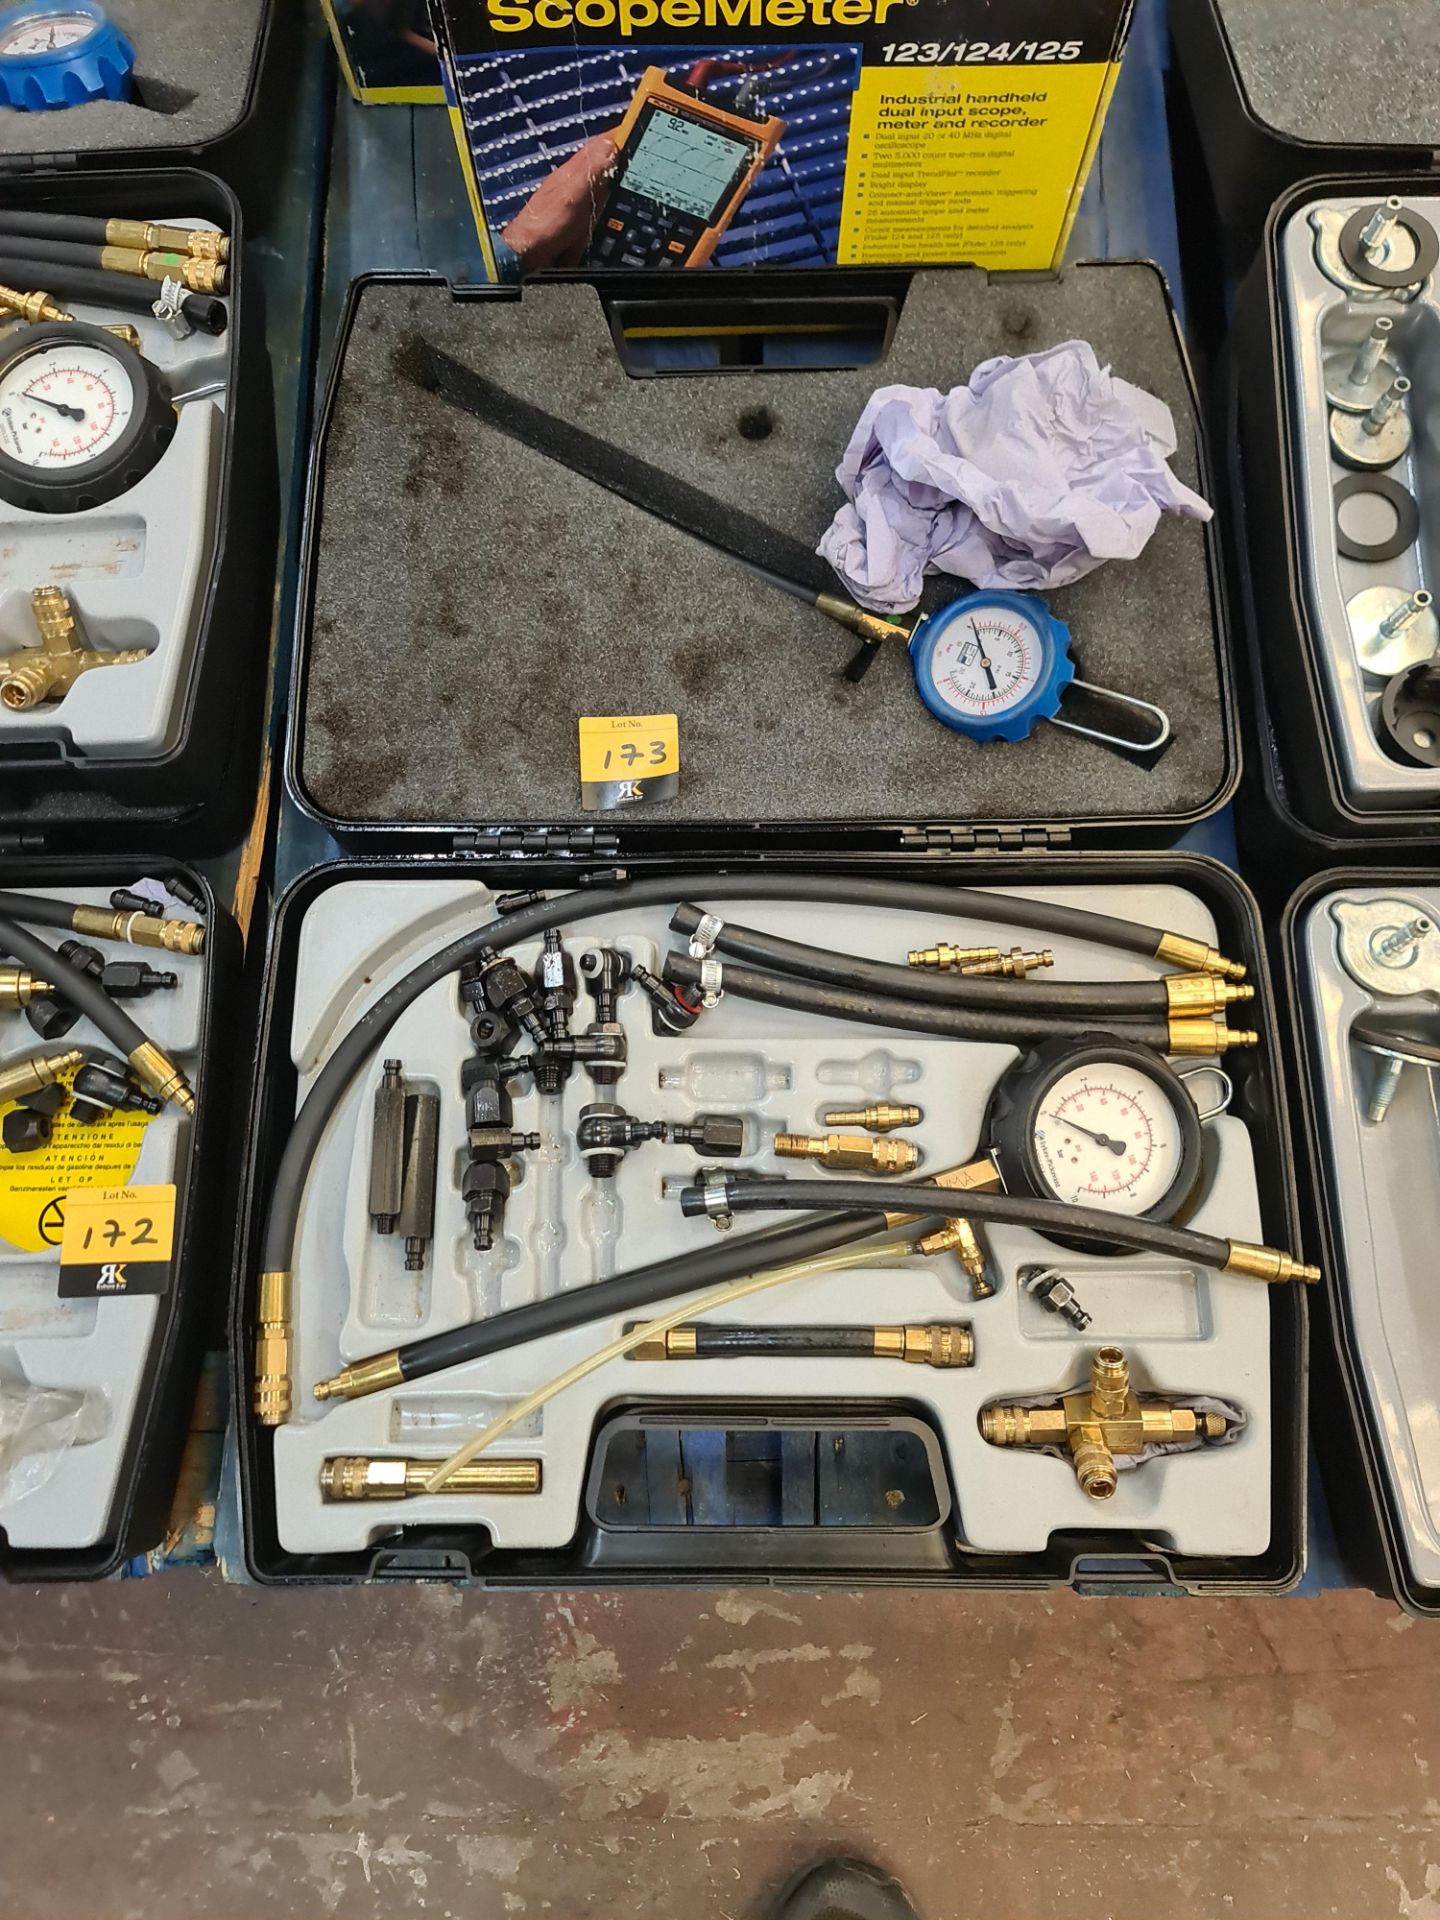 Fuel pressure measurement kit in case with ancillaries